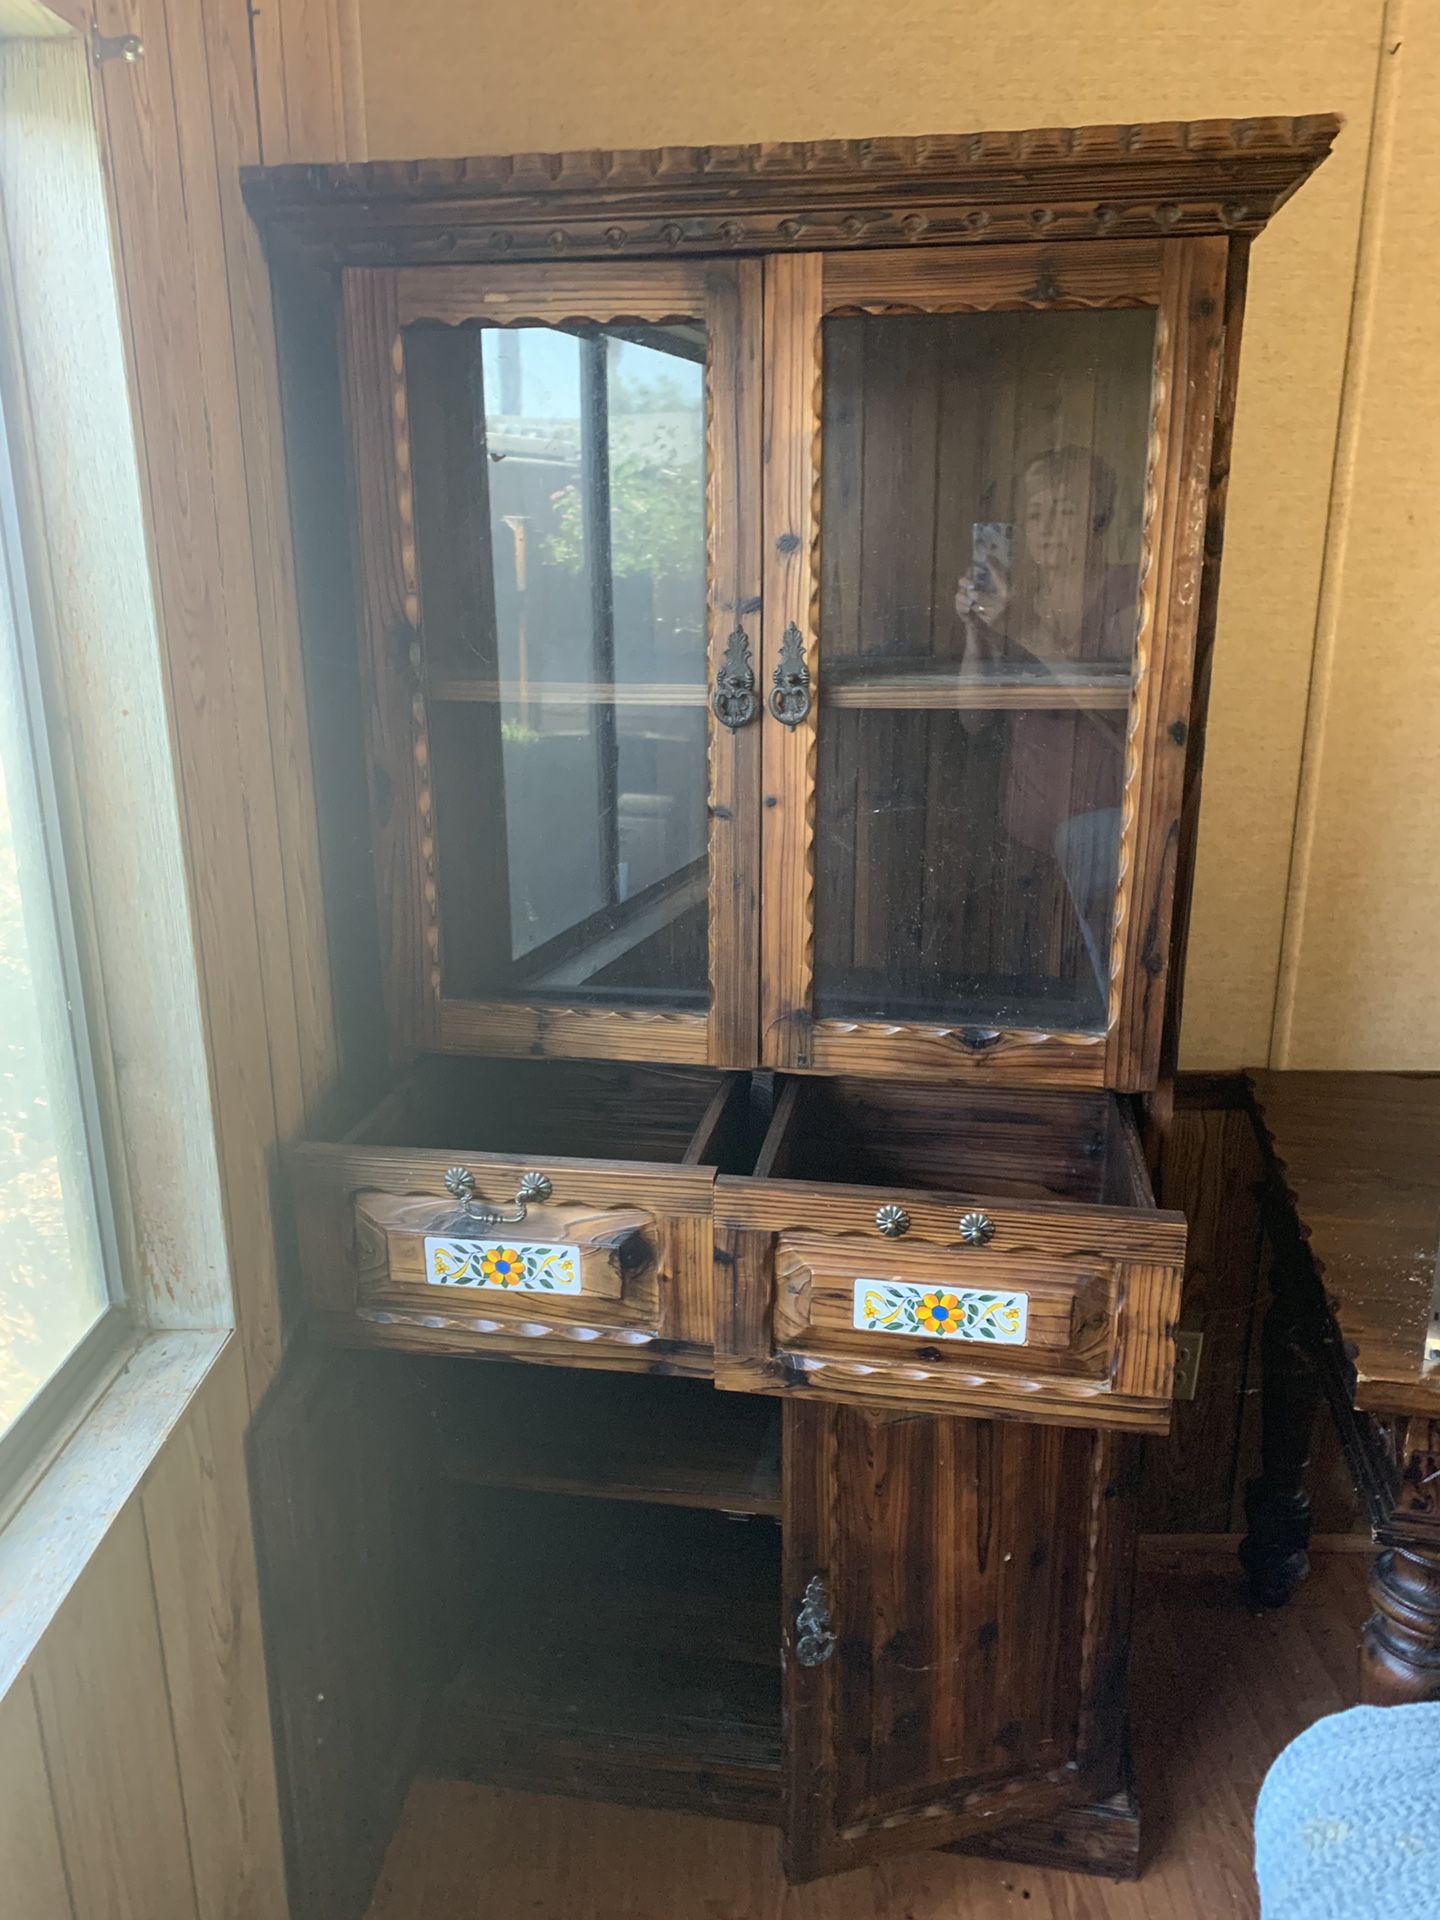 Needs to be picked up Wednesday morning. Antique hutch and dining table. Located near 16th St. and Bell Road